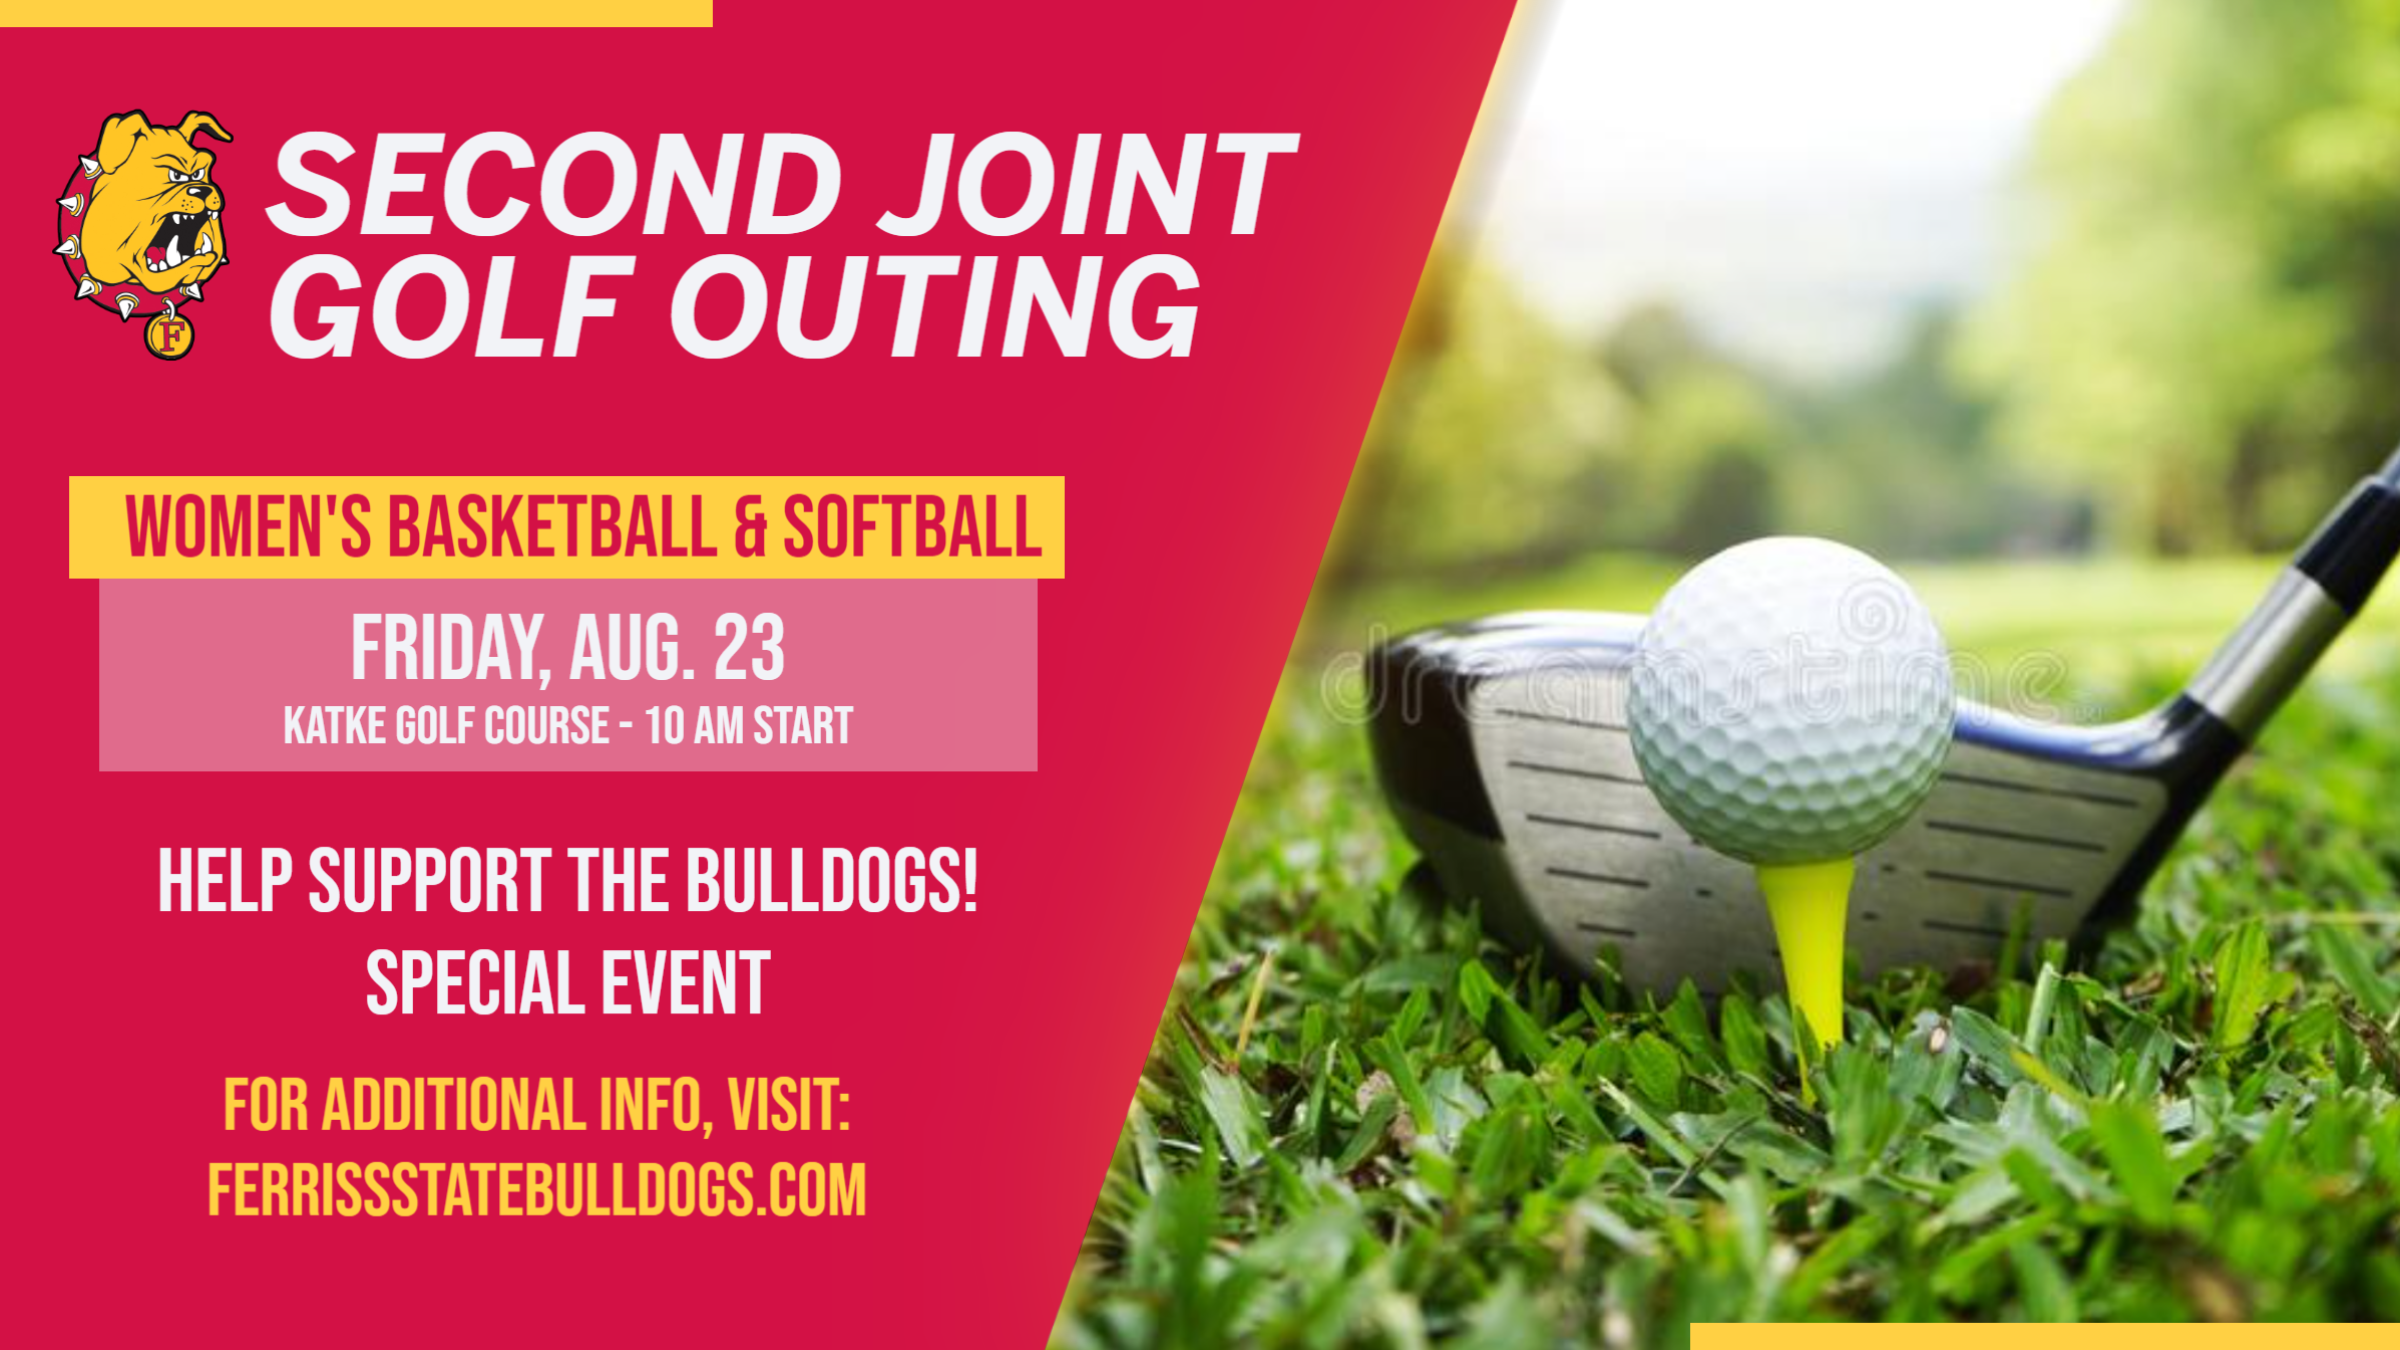 Second Annual Ferris State Women's Basketball And Softball Joint Golf Outing On Aug. 23